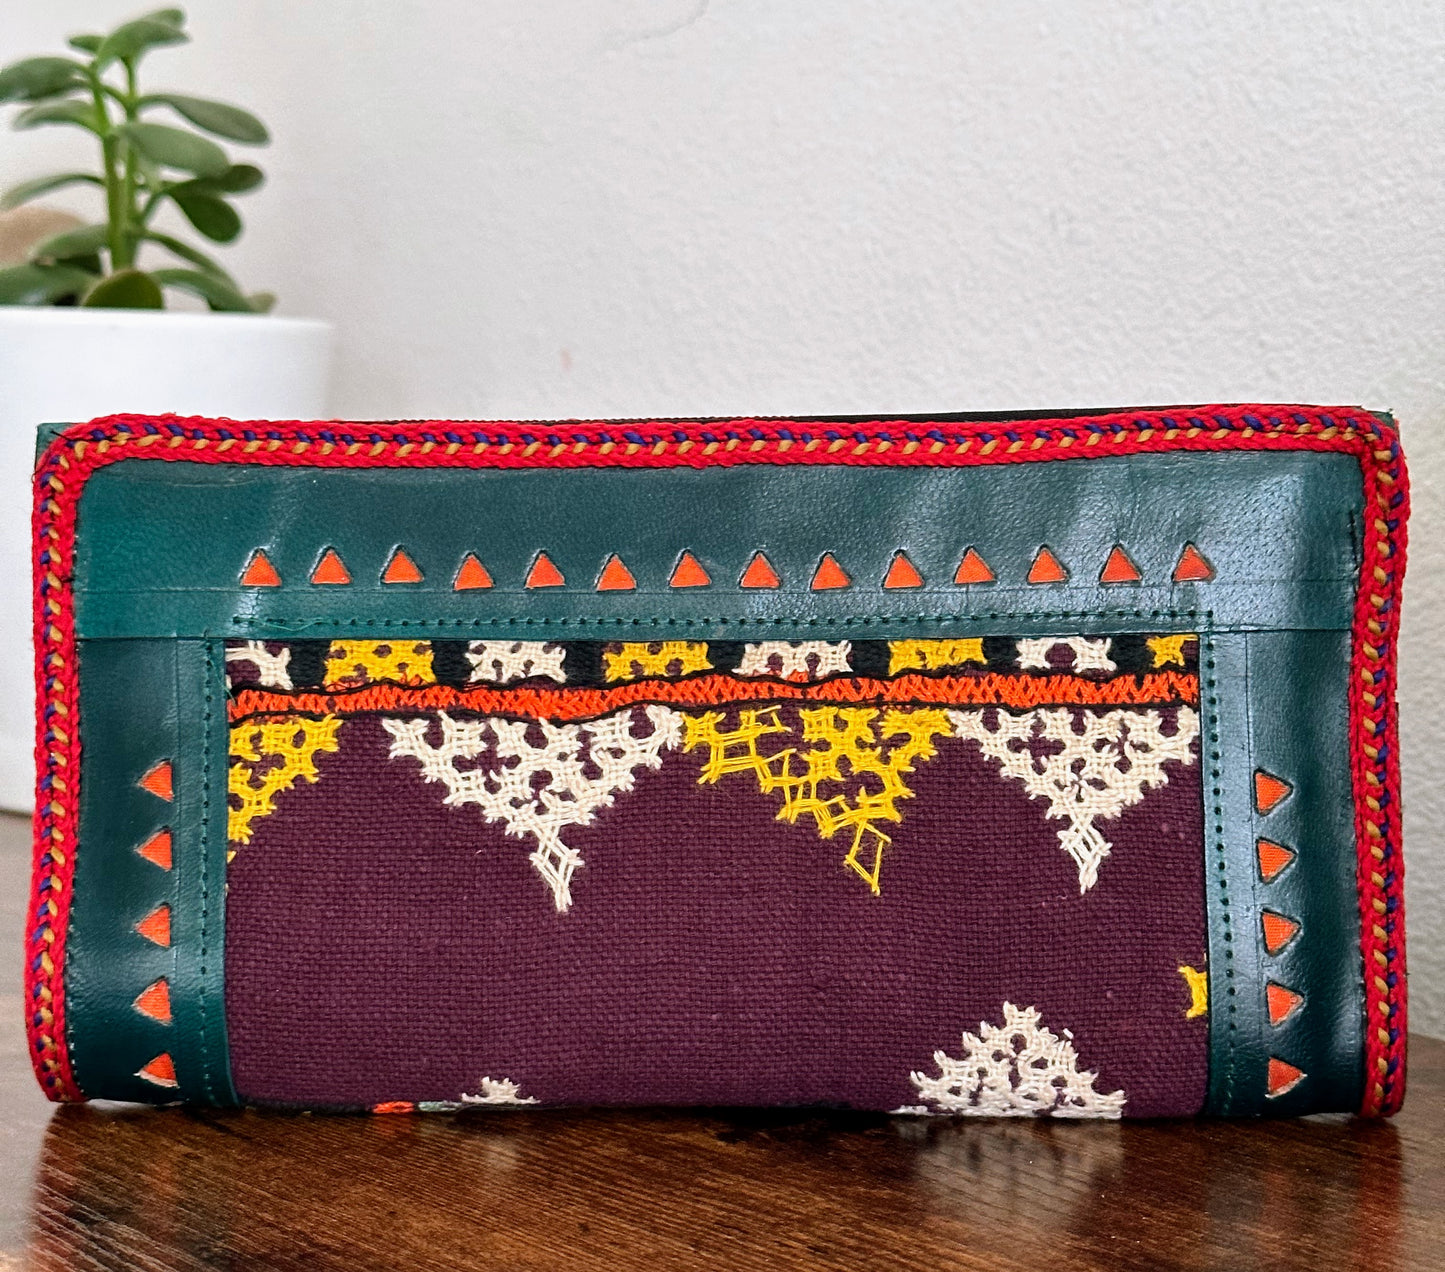 Kutch-Embroidered-Clutch-Wallet-2